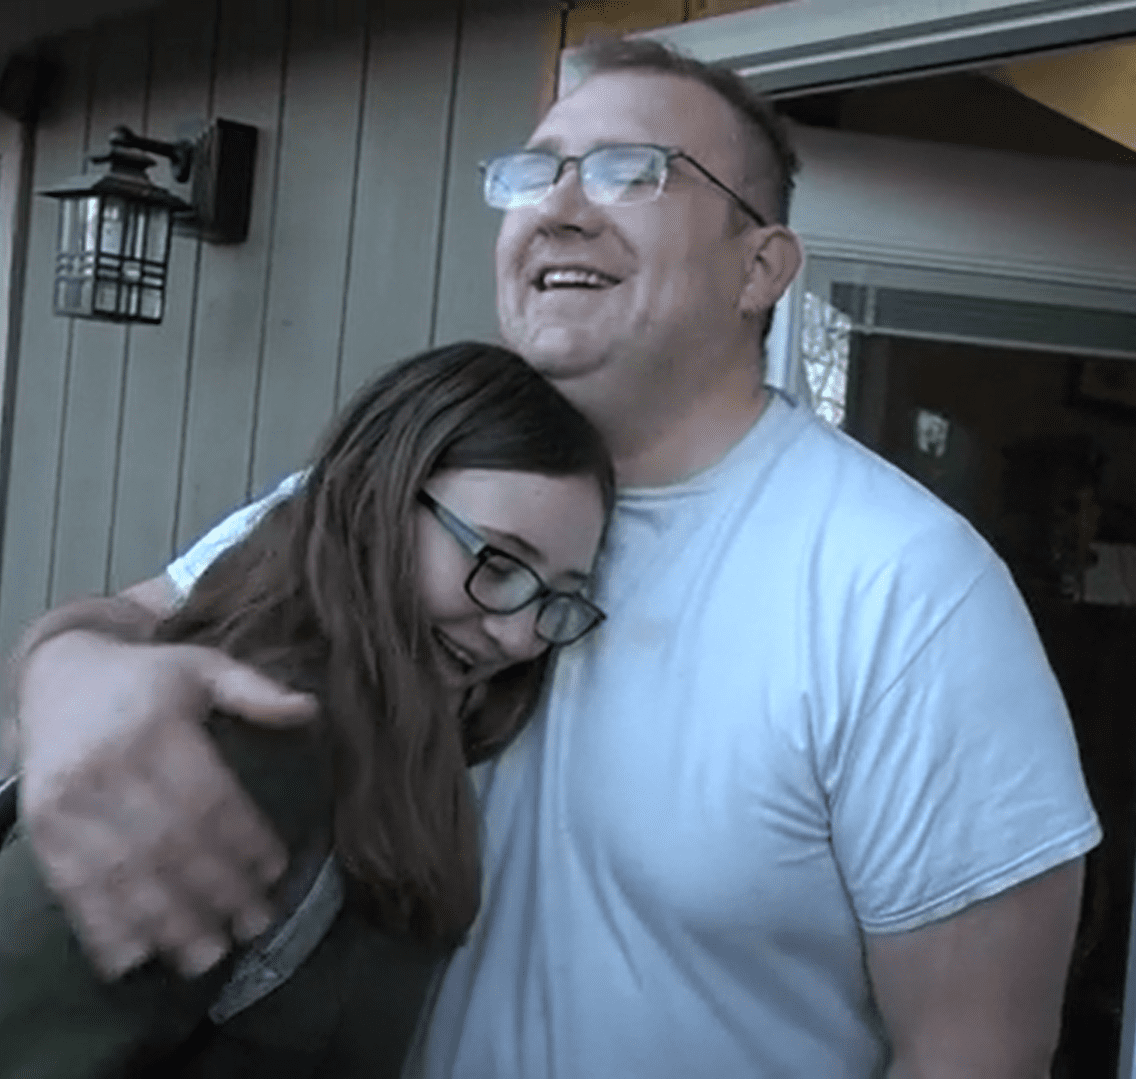 Emily placing her head on her father's chest after breaking the good news to him. | Source: youtube.com/East Idaho News